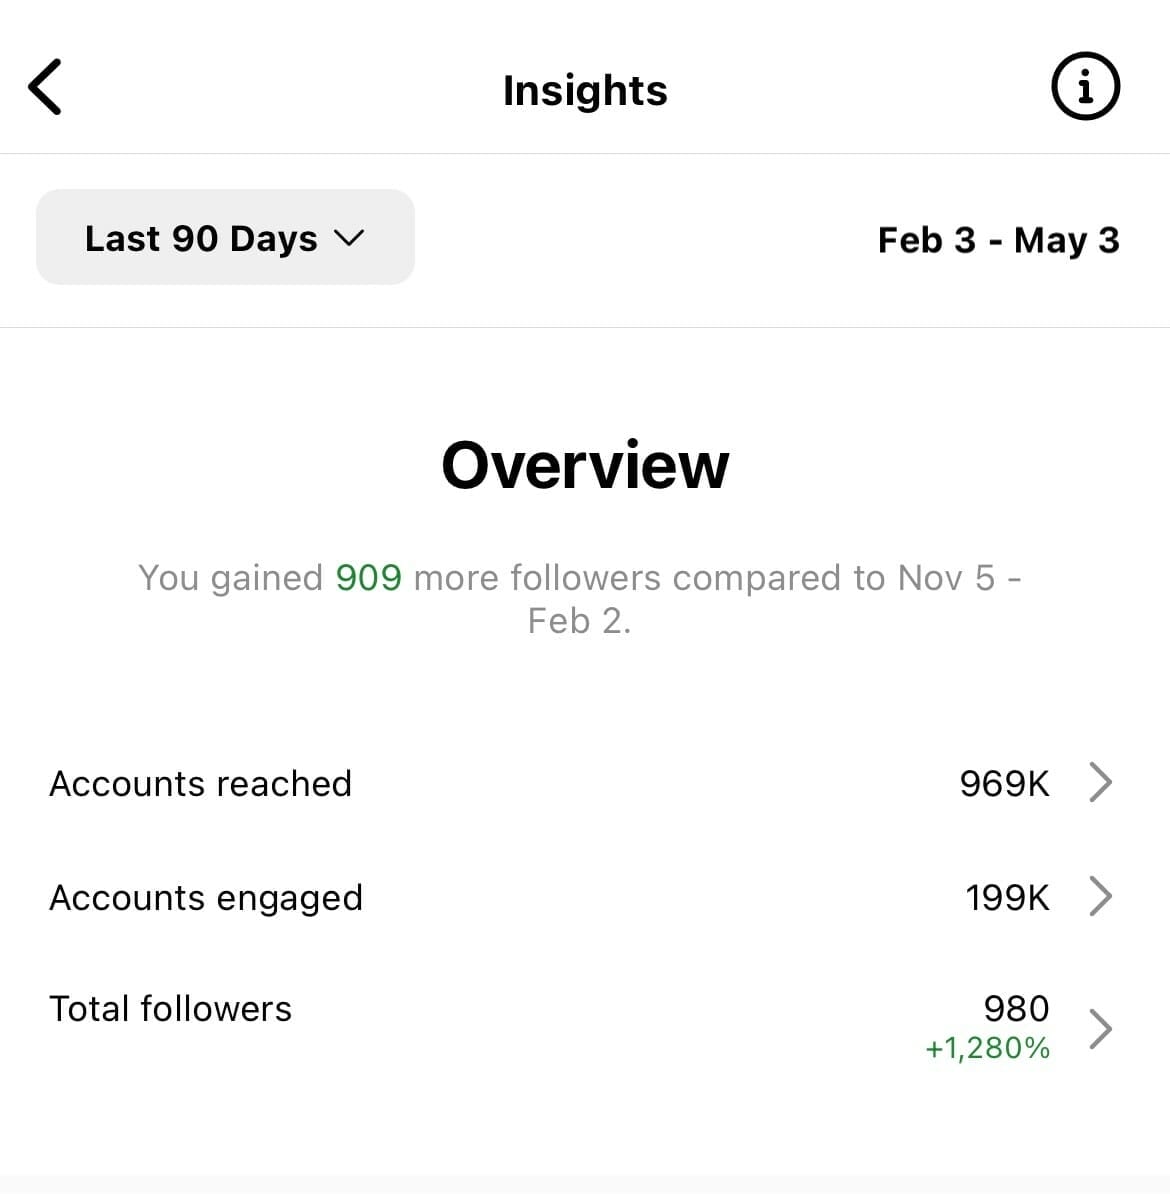 Overview of Instagram insights